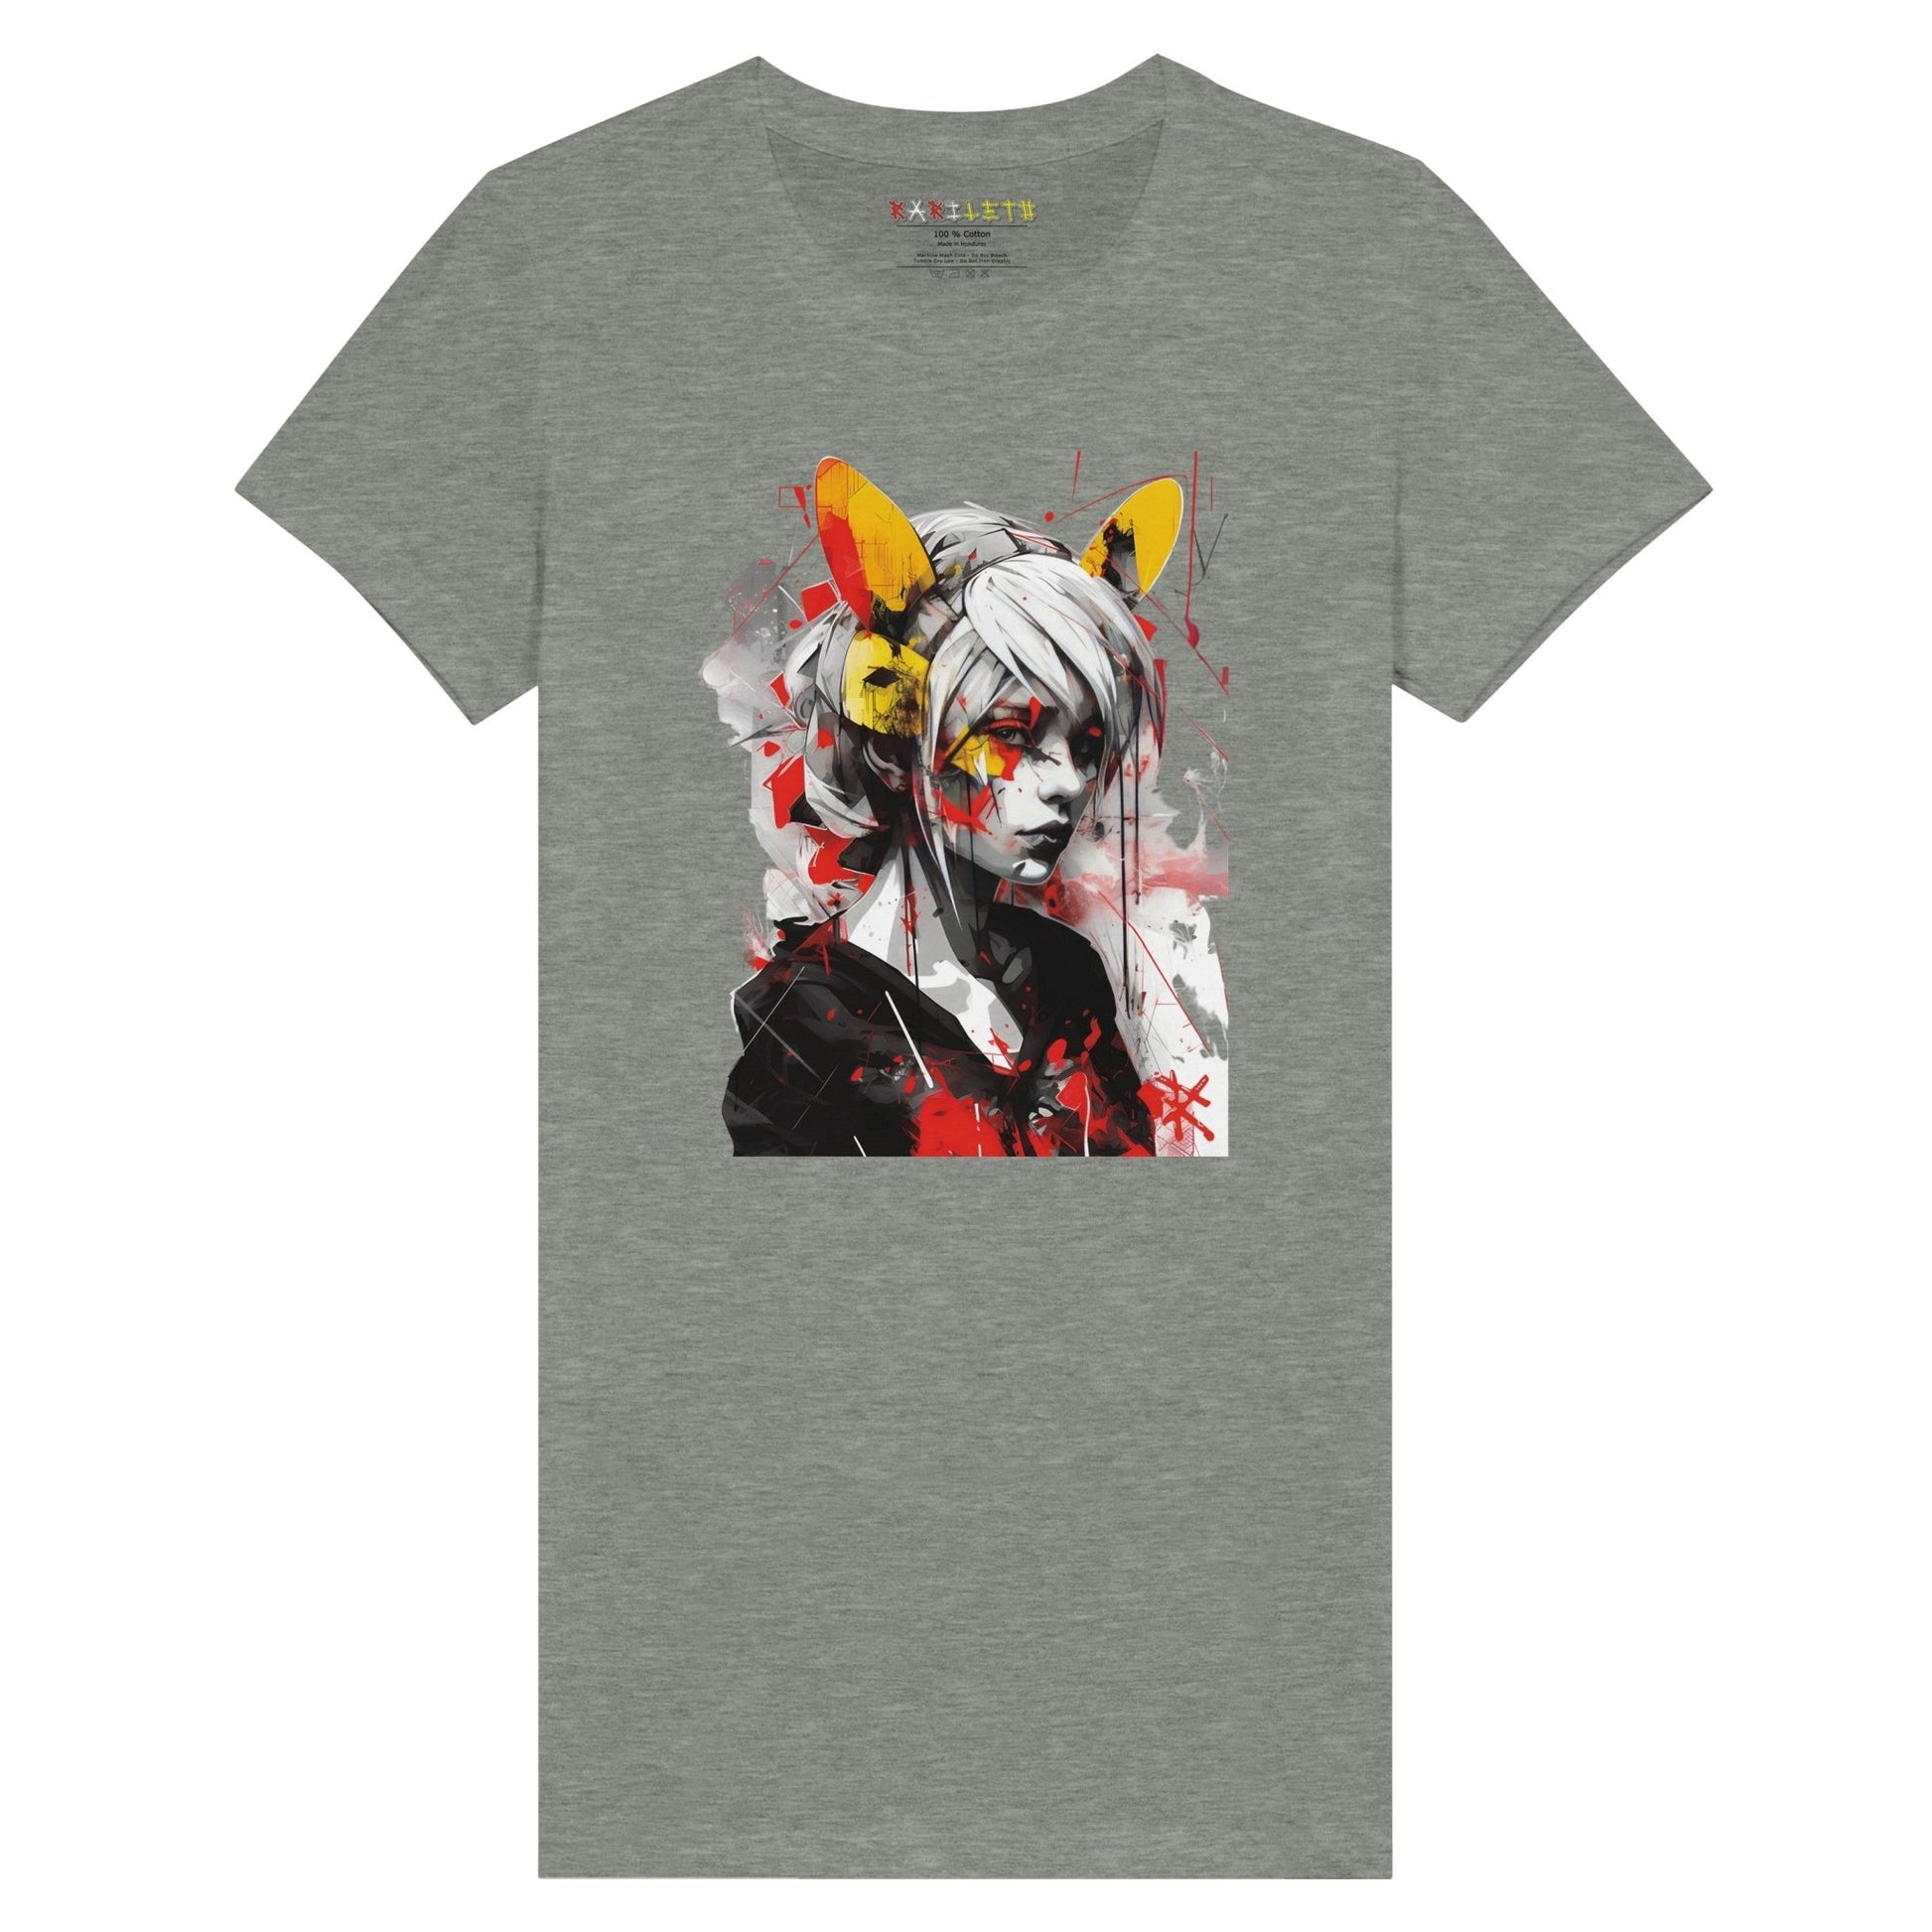 GIRL WITH CAT EARS Premium Tee - Rarileto t shirts - Athletic Heather - S